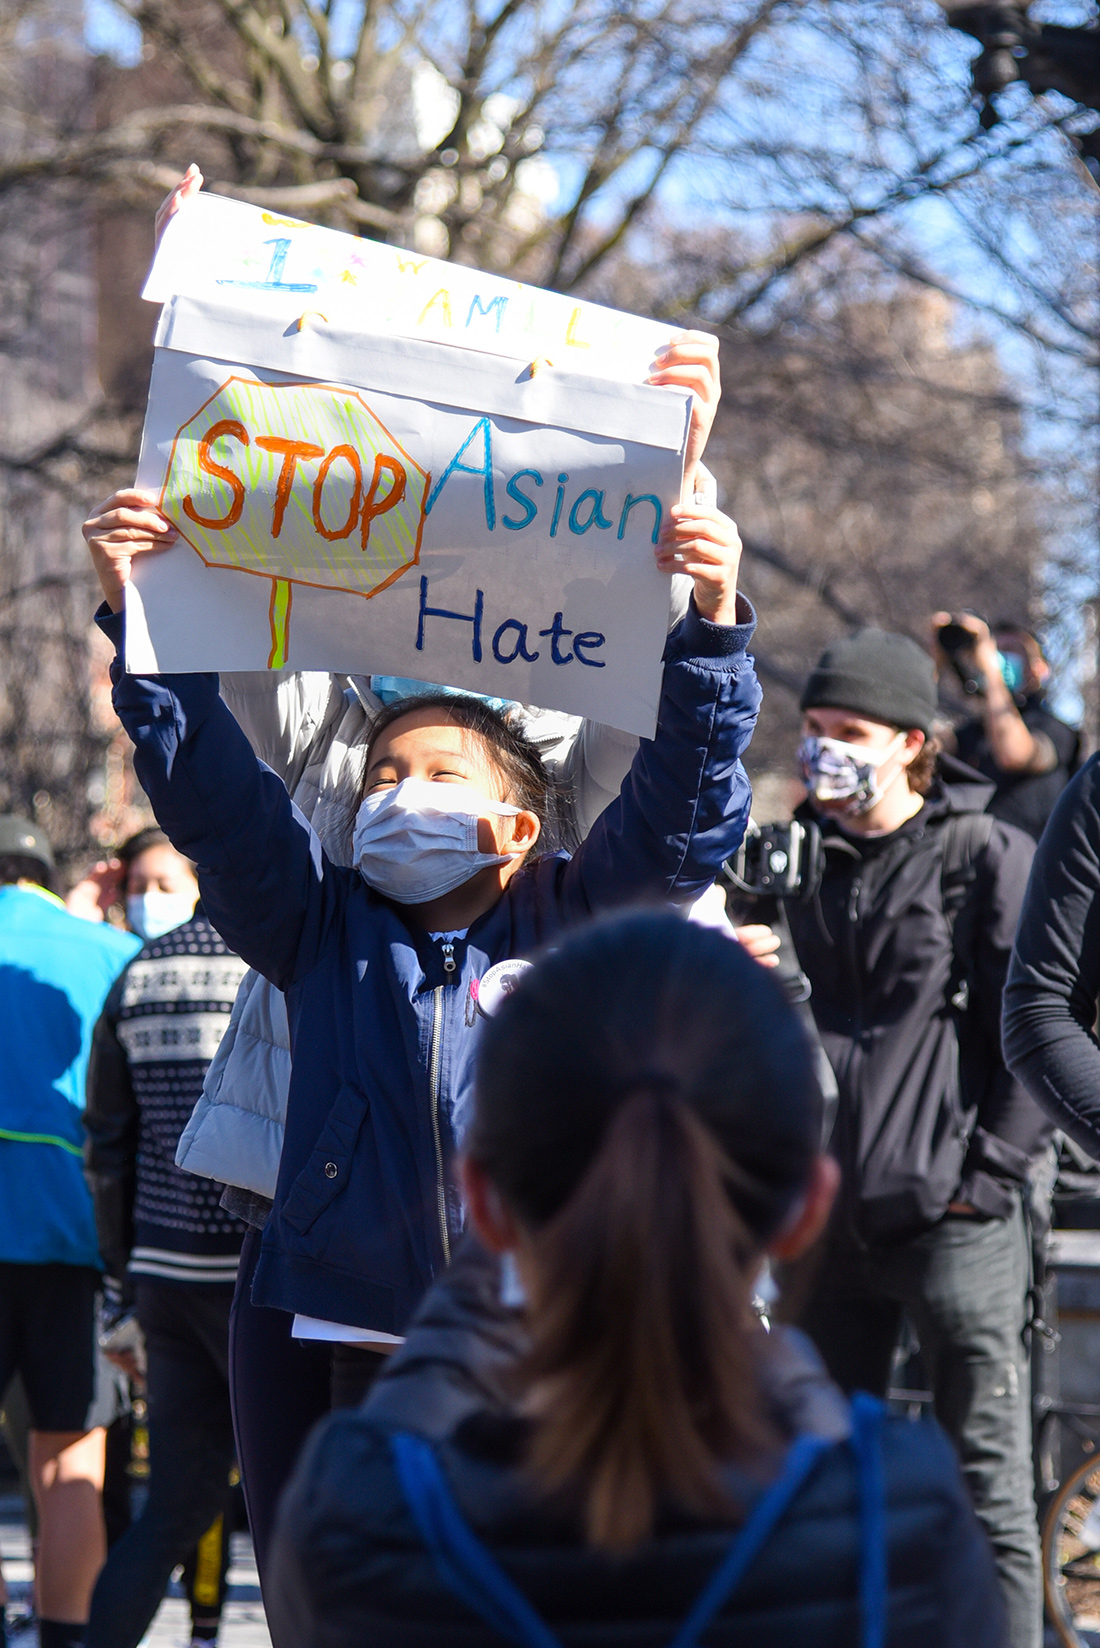 A young Asian girl wearing a mask holds a sign that reads "Stop Asian Hate" during the New York City protests.